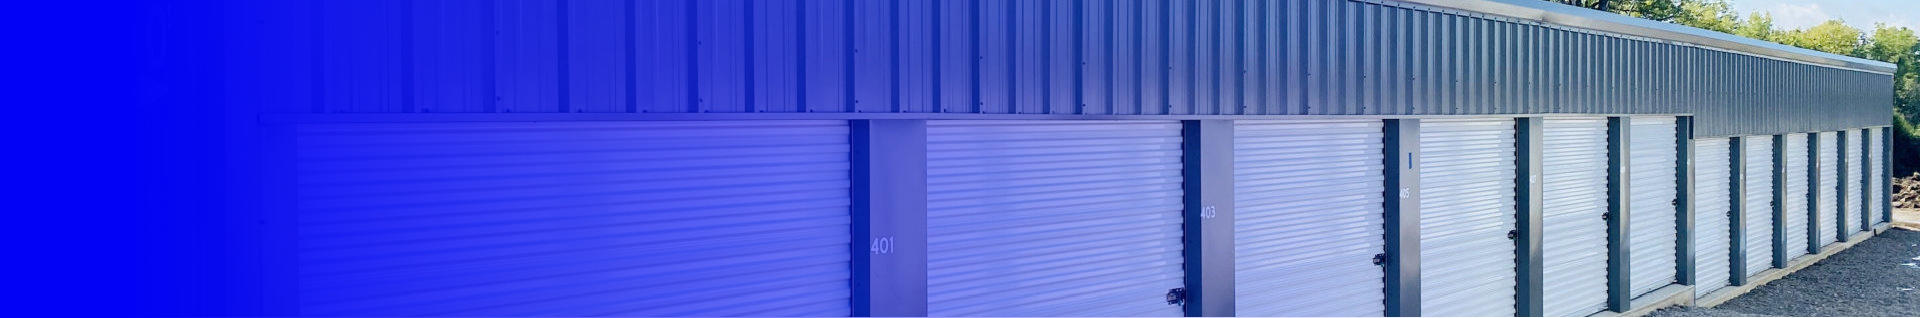 Silo Steel Buildings' storage units, showcasing the strength and versatility of our durable steel structures, ready to meet your storage needs.